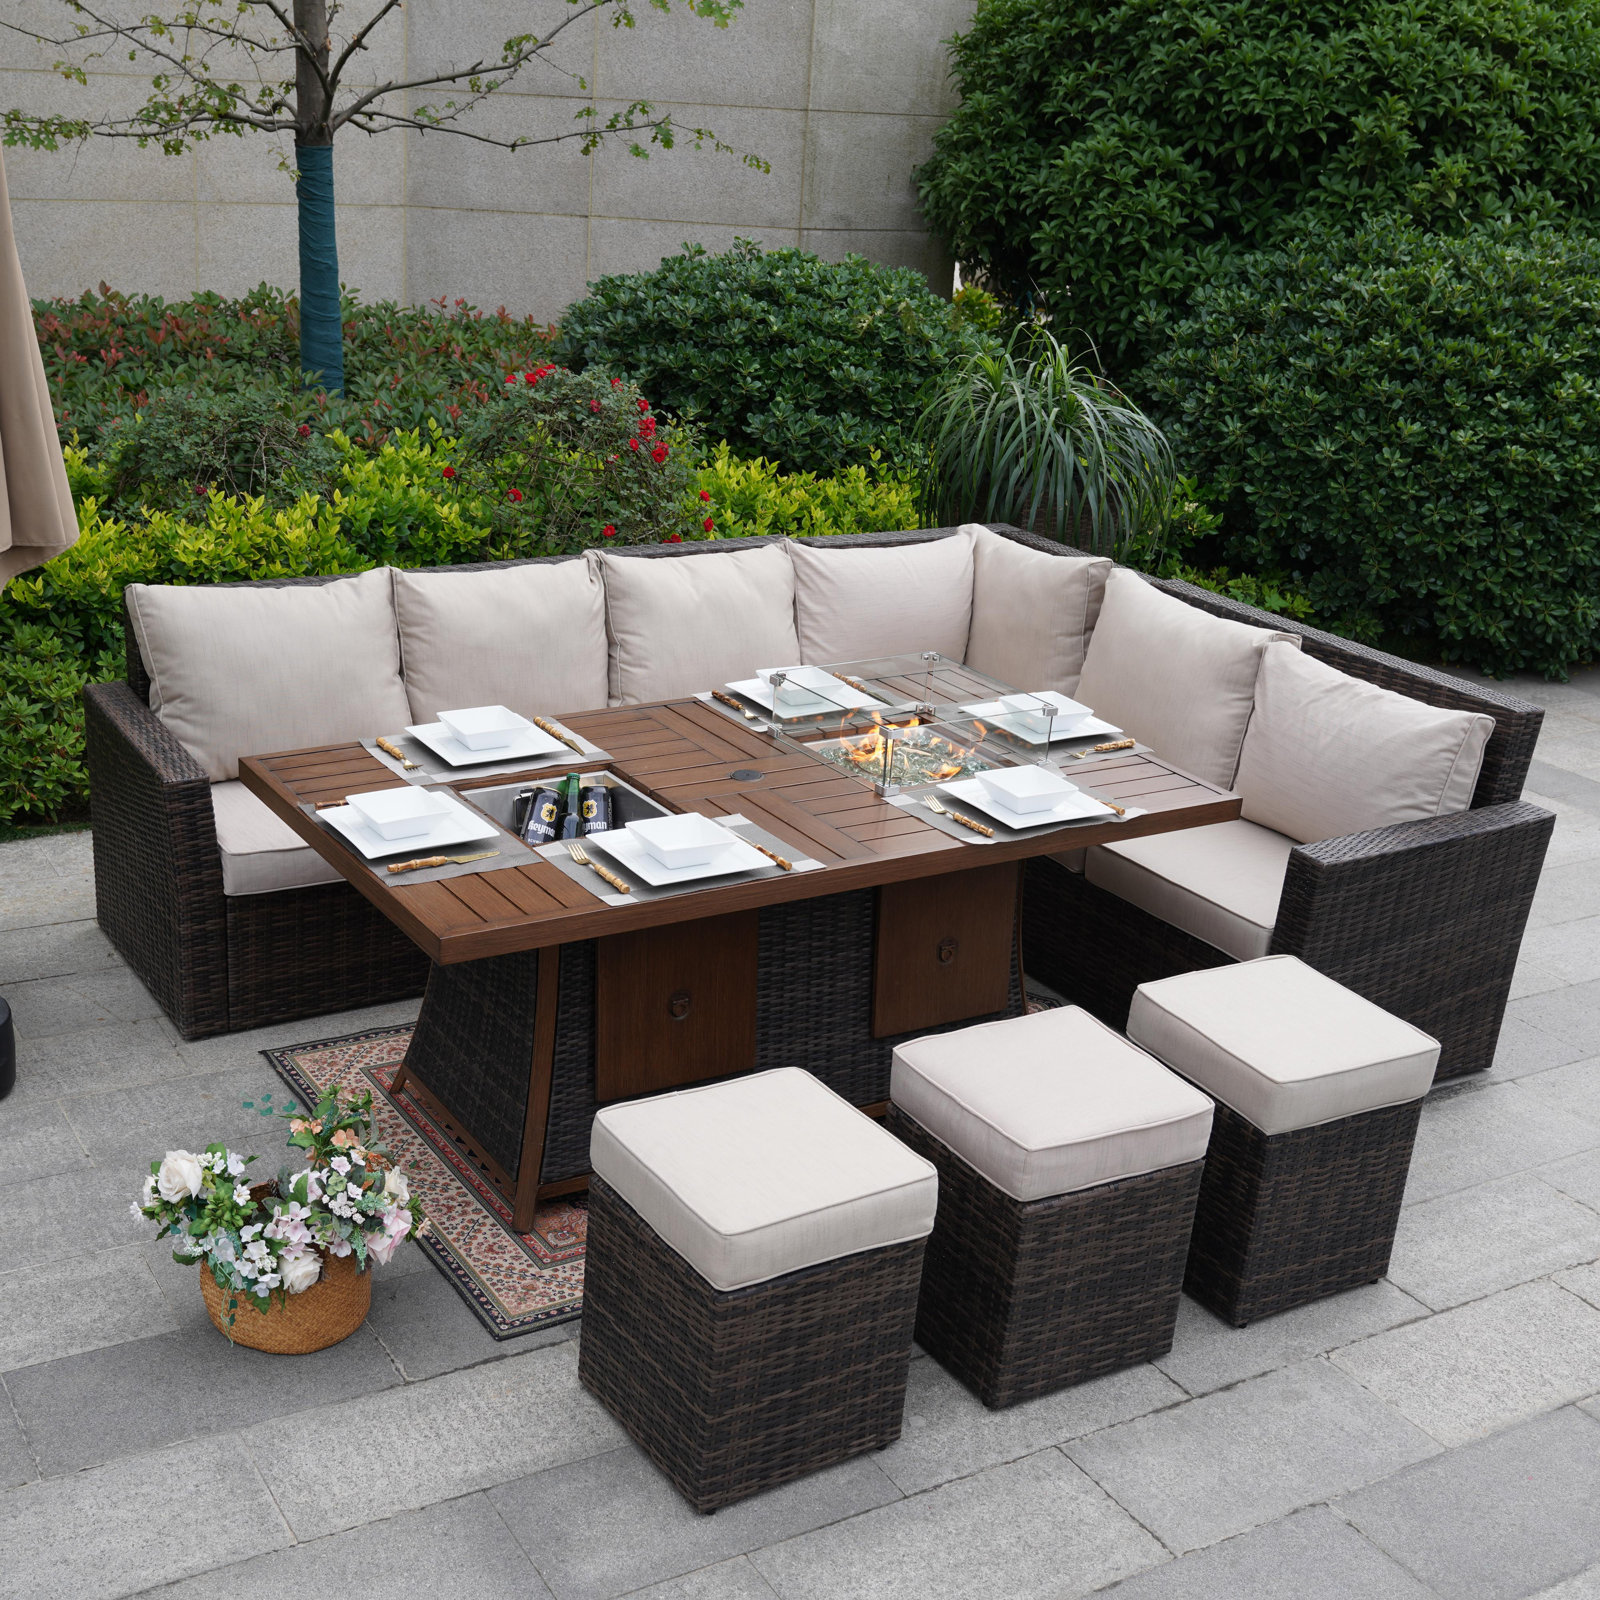 Ebern Designs Talyn Polyethylene (PE) Wicker 9 - Person Seating Group with Cushions